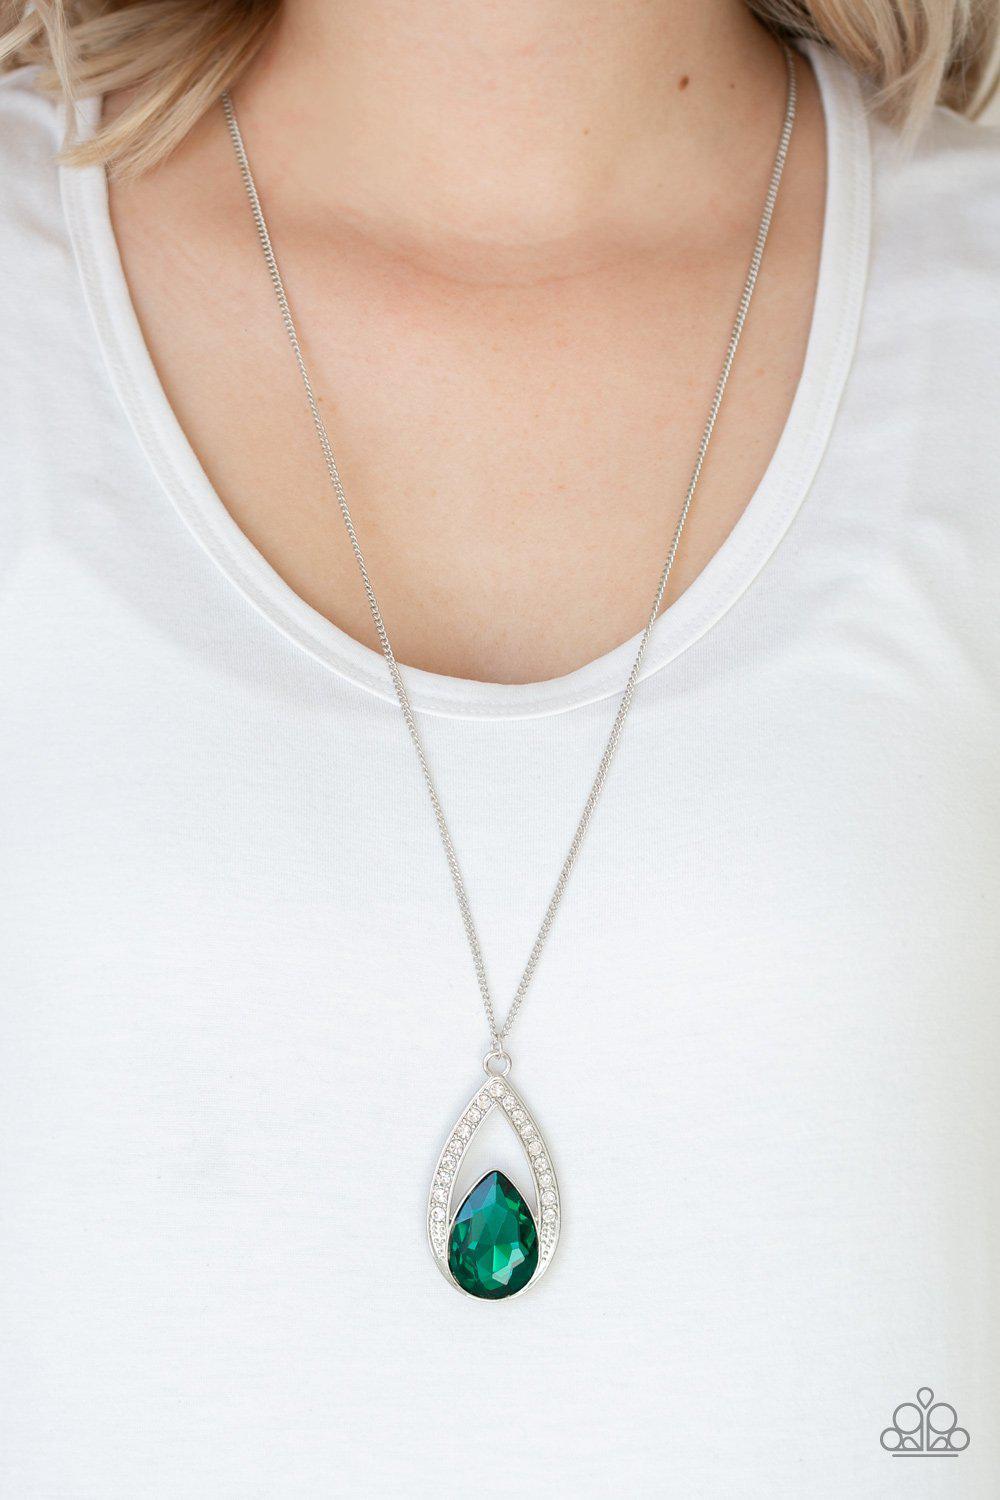 Notorious Noble Green Gem Pendant Necklace - Paparazzi Accessories-CarasShop.com - $5 Jewelry by Cara Jewels